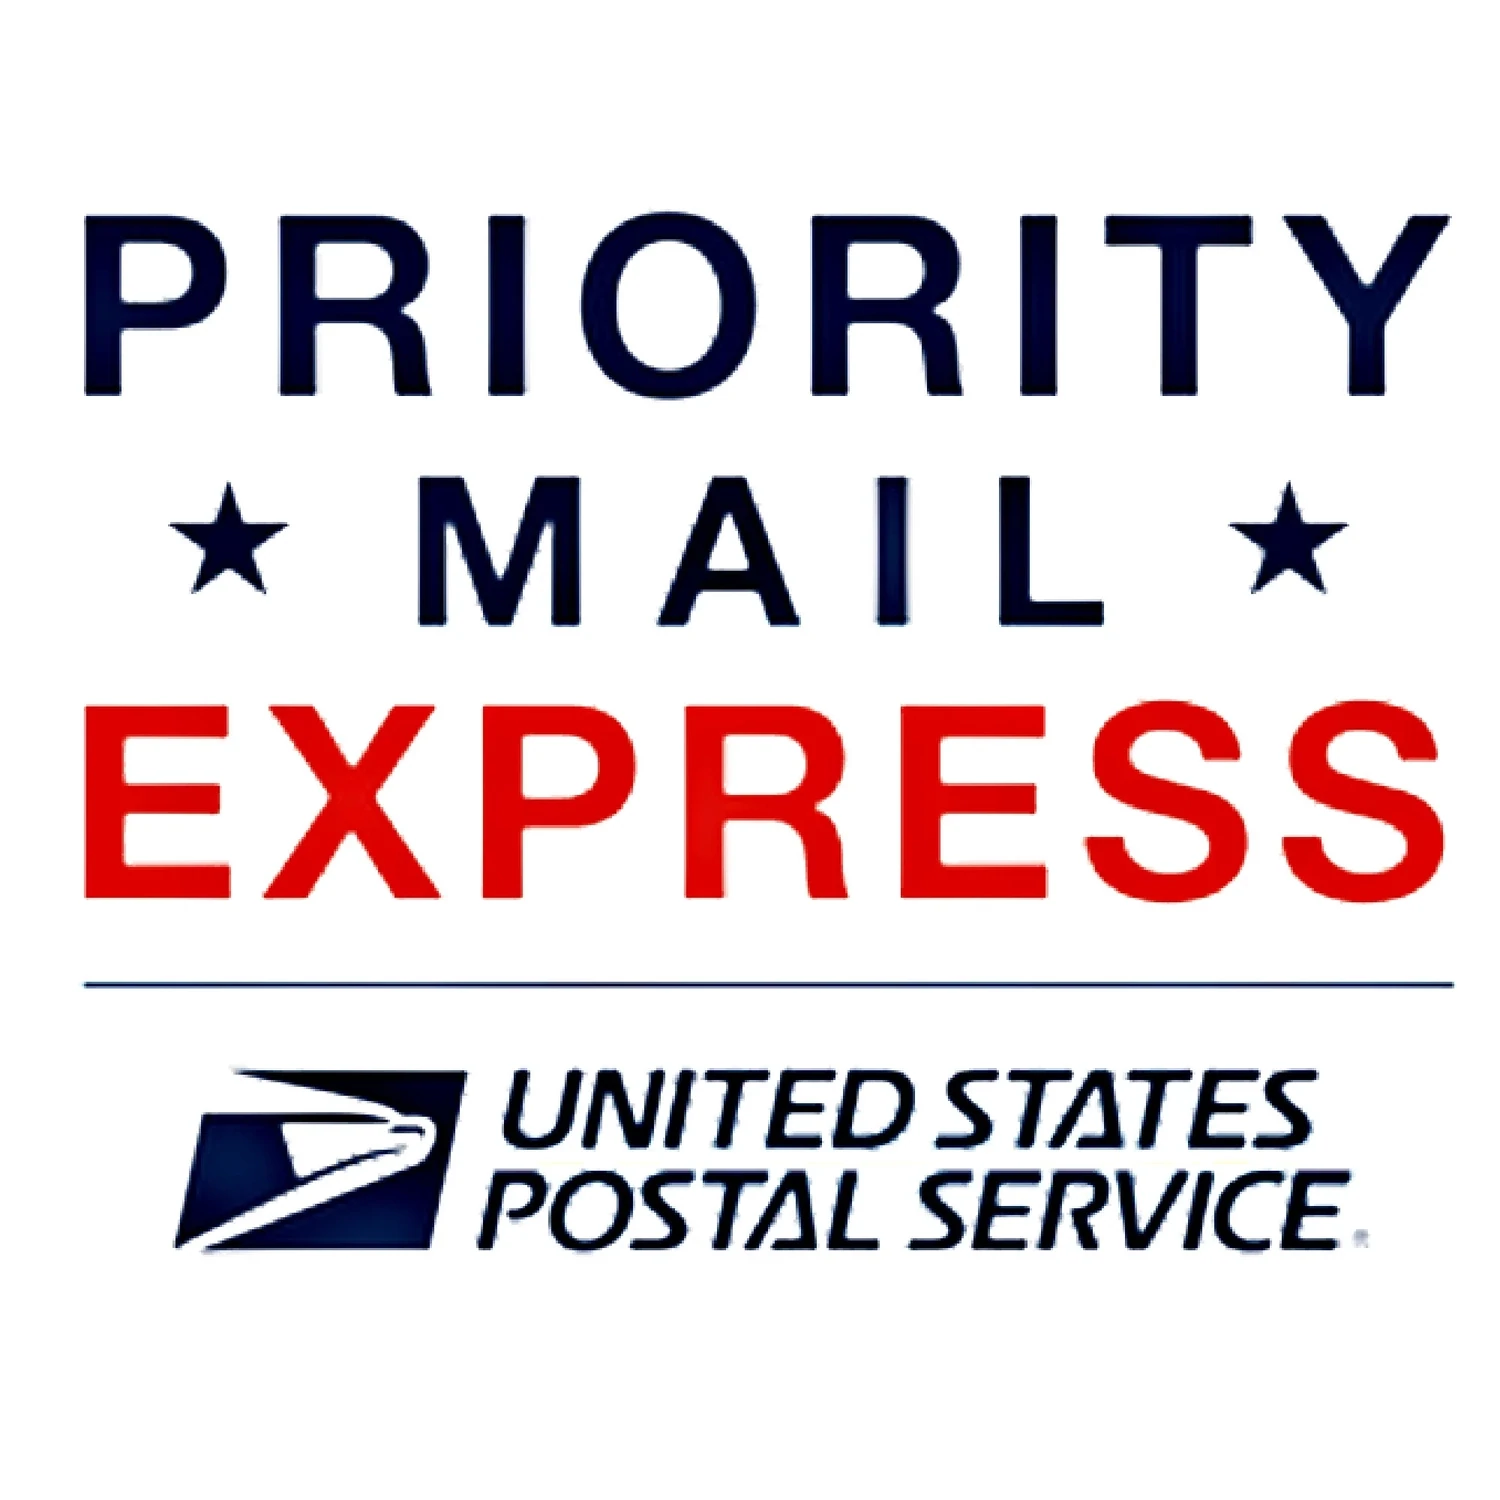 EXPRESS RUSH ORDER WITH PICTURES SENT IN UNDER 72 HOURS AND ITEMS IN YOUR HANDS IN 5 DAYS OR LESS*